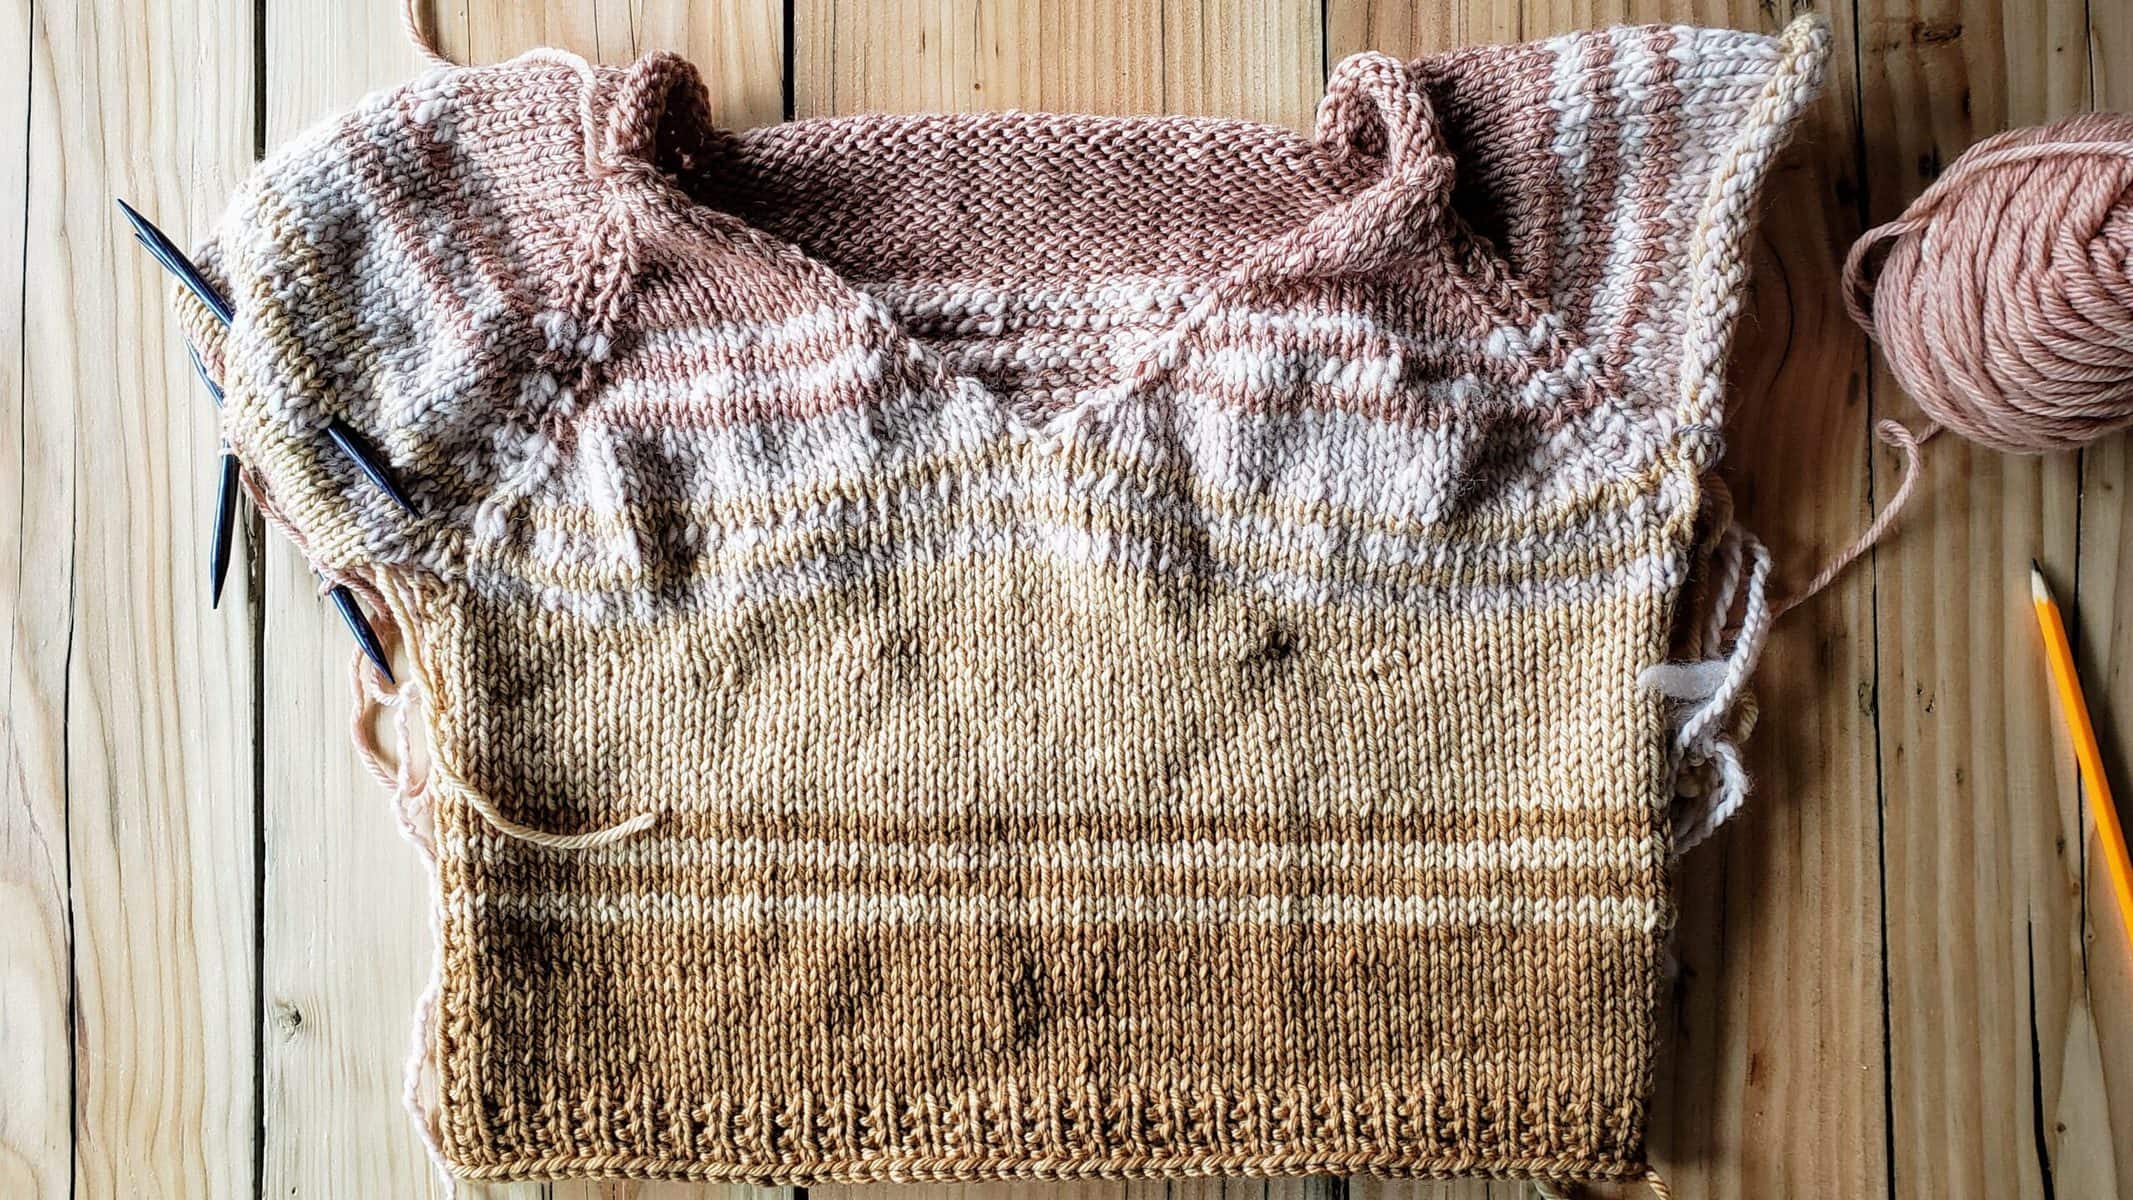 Photo of a striped knitted sweater in progress, made from avocado- and tea-dyed yarns.